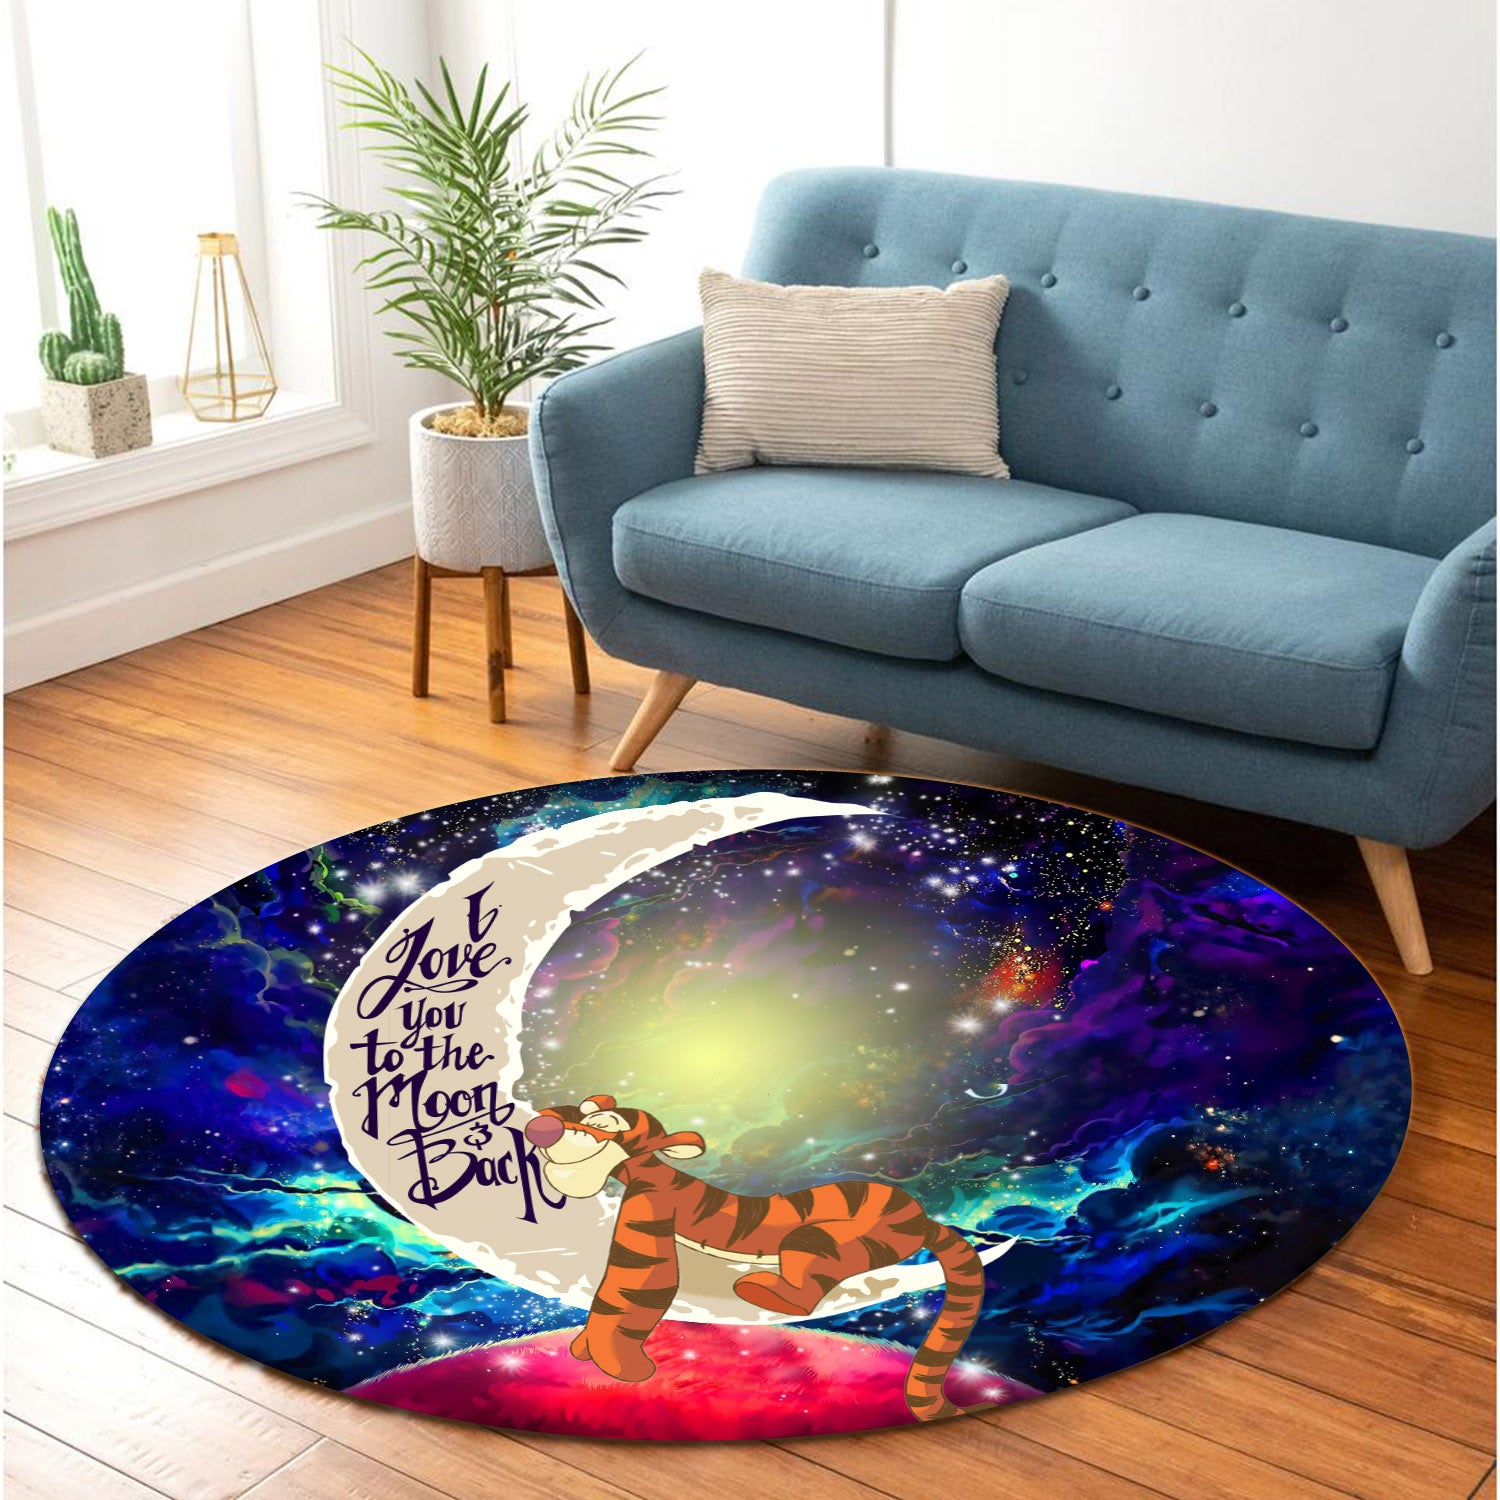 Tiger Winnie The Pooh Love You To The Moon Galaxy Round Carpet Rug Bedroom Livingroom Home Decor Nearkii